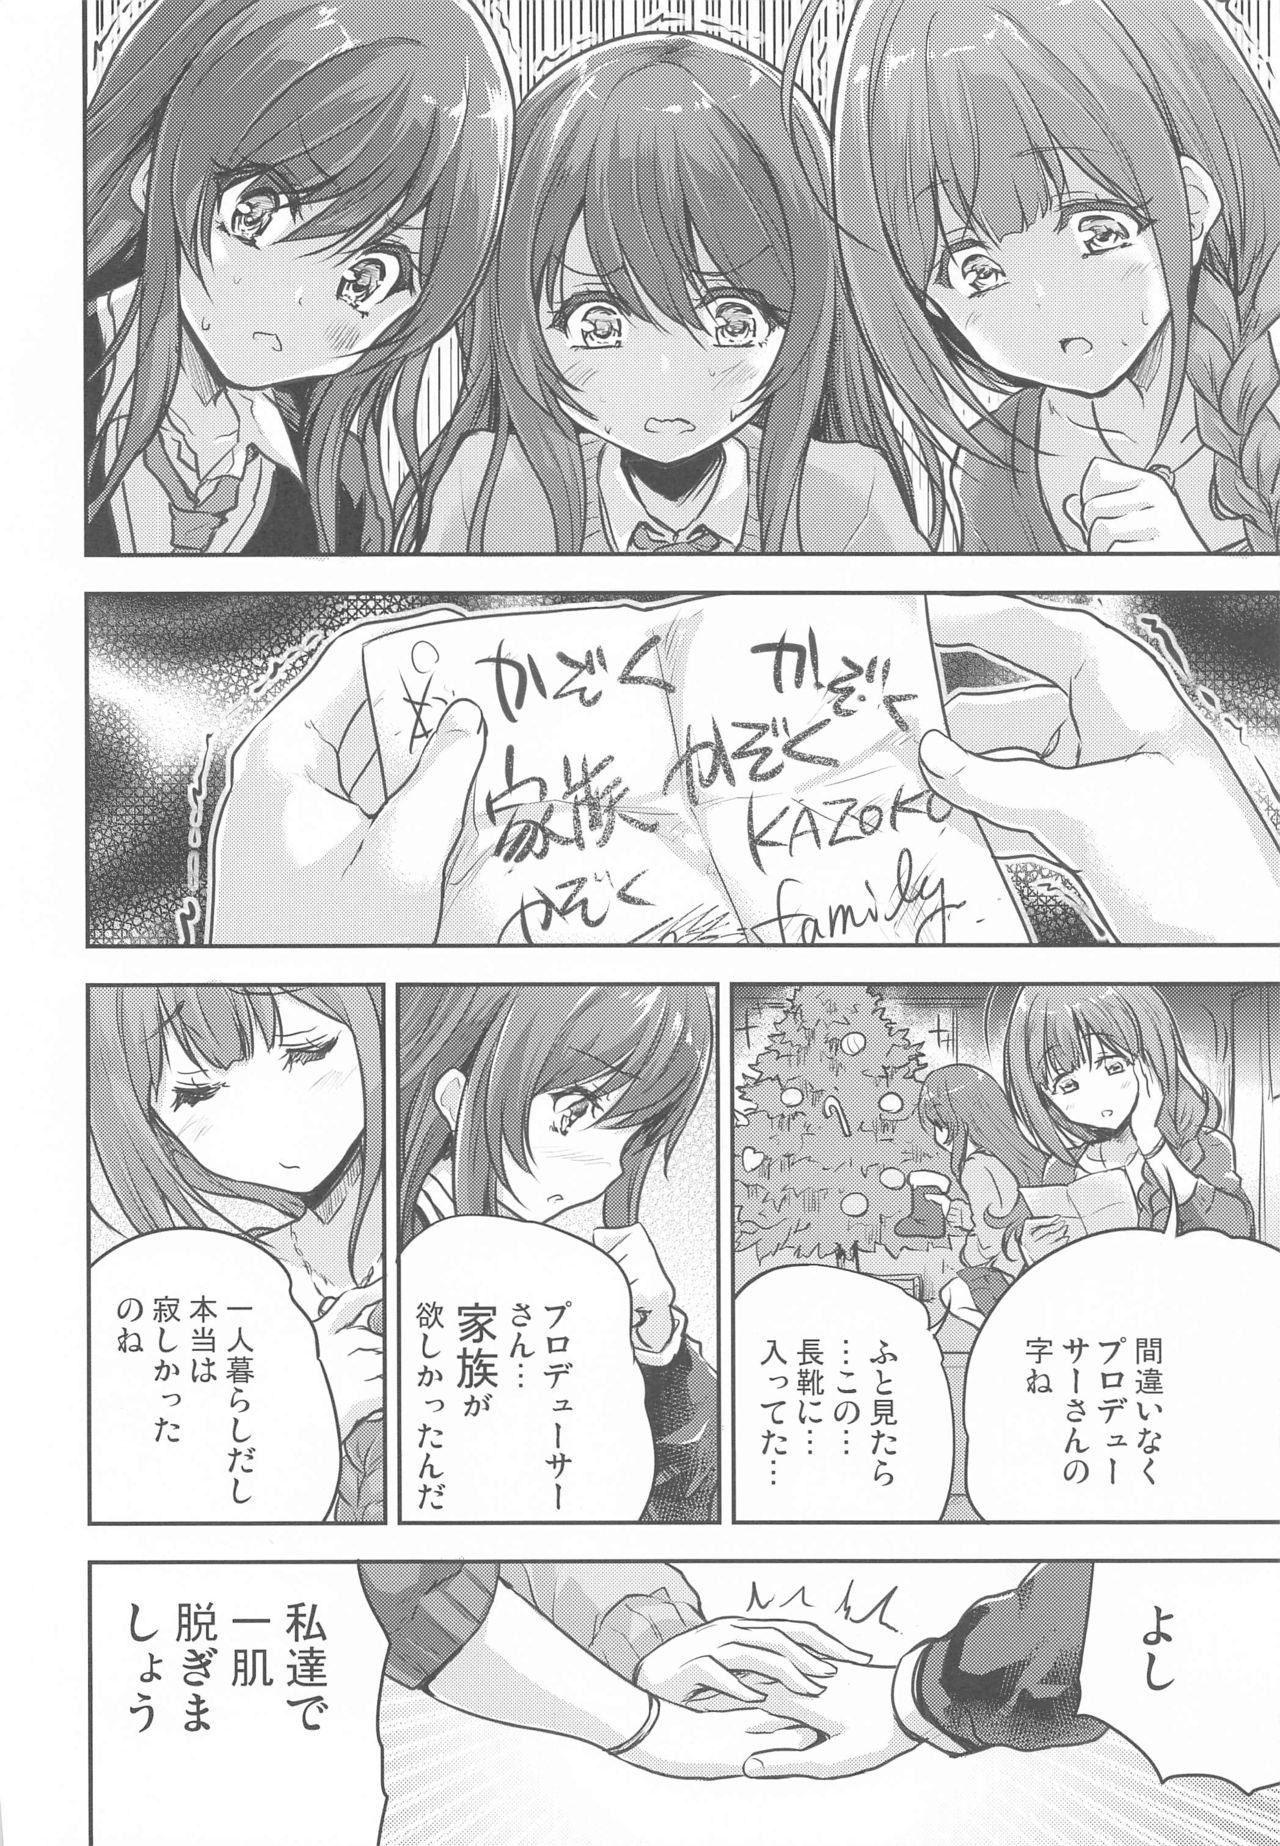 Bath Happening Eve - The idolmaster Tamil - Page 5